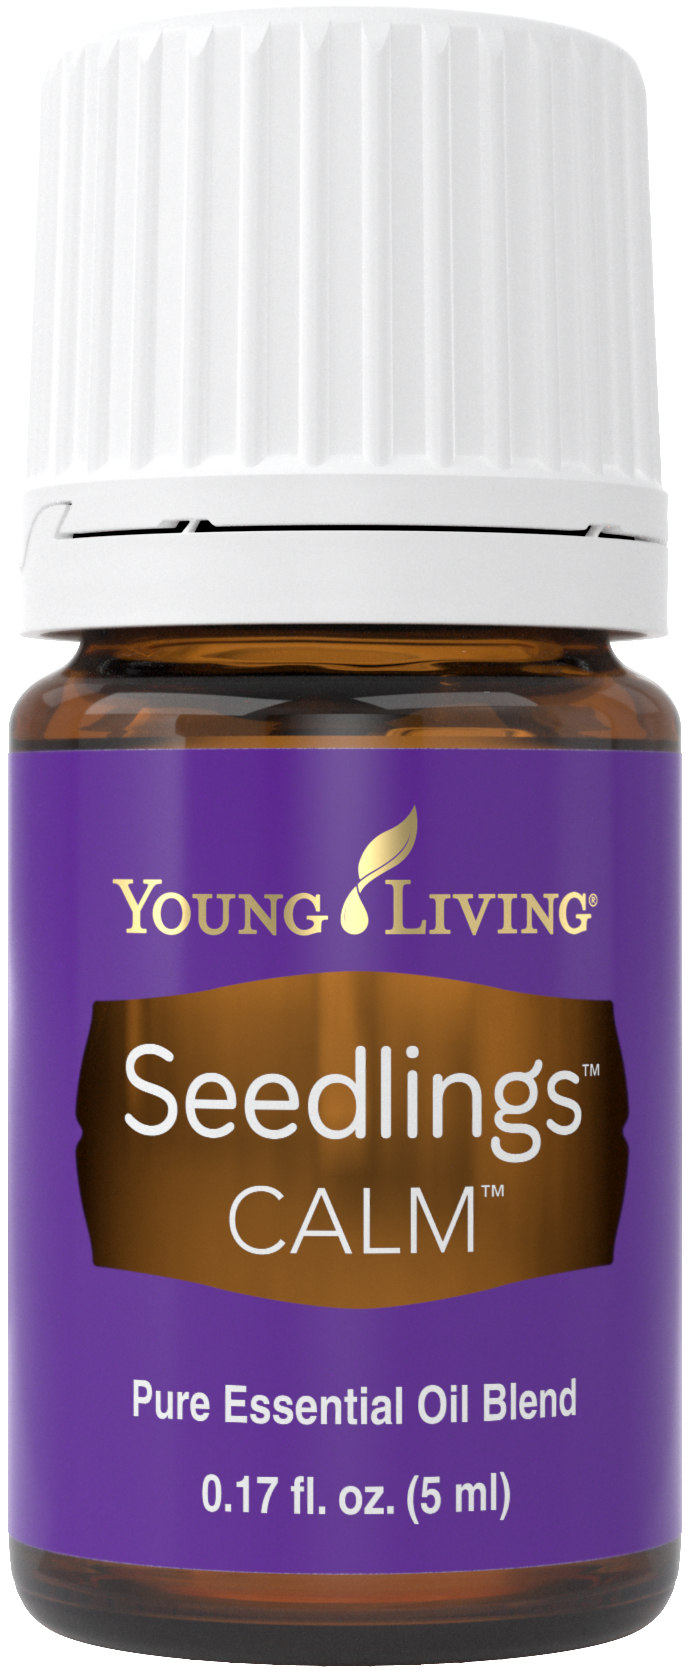 Seedlings Calm Essential Oil Blend - Young Living Essential Oils 